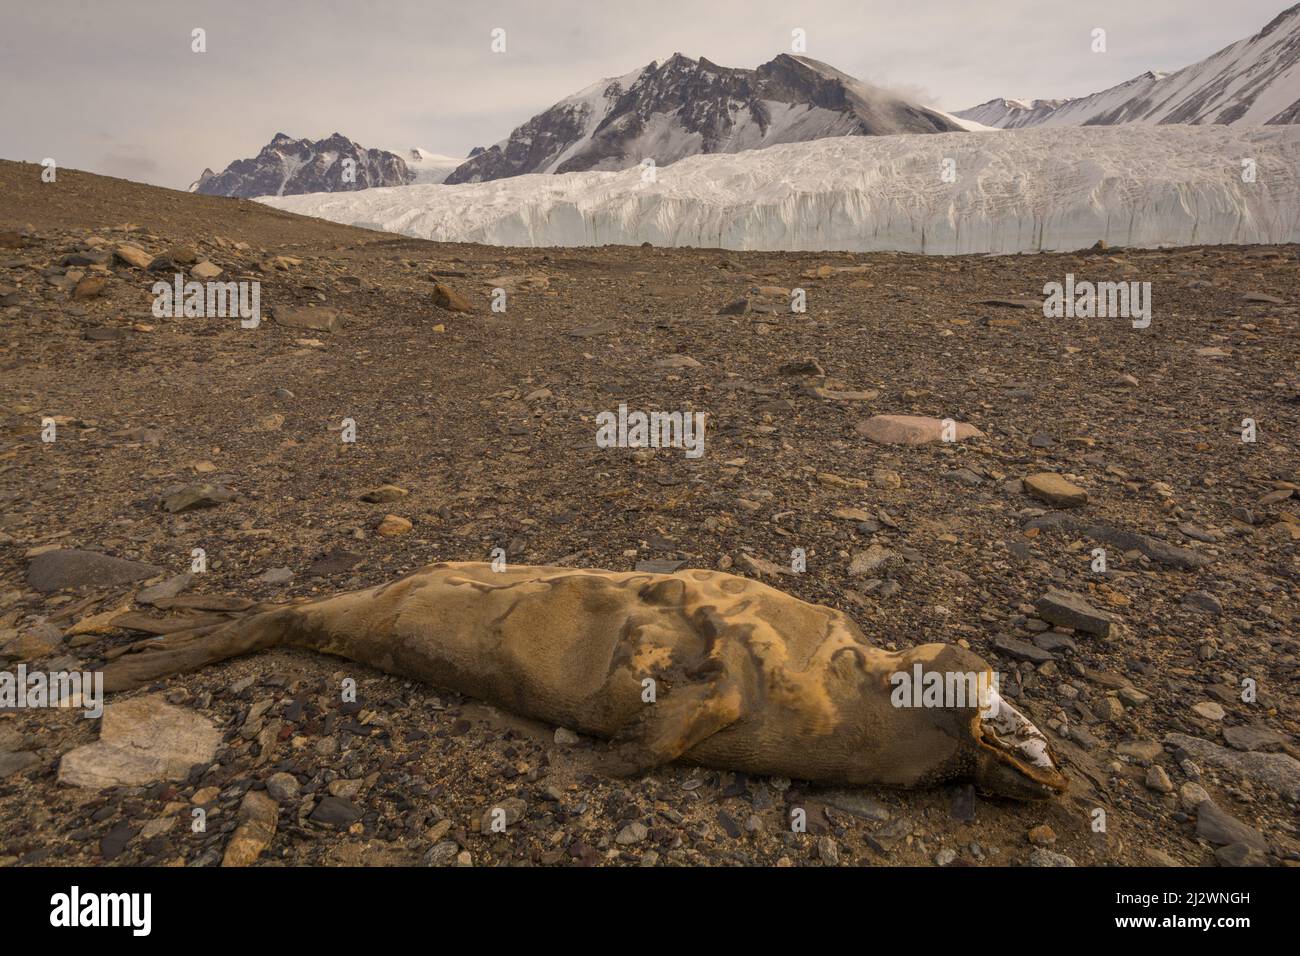 A mummified Crabeater Seal (Lobodon carcinophaga) in the Taylor Valley in the McMurdo Dry Valleys, Antarctica, with the Canada Glacier behind Stock Photo